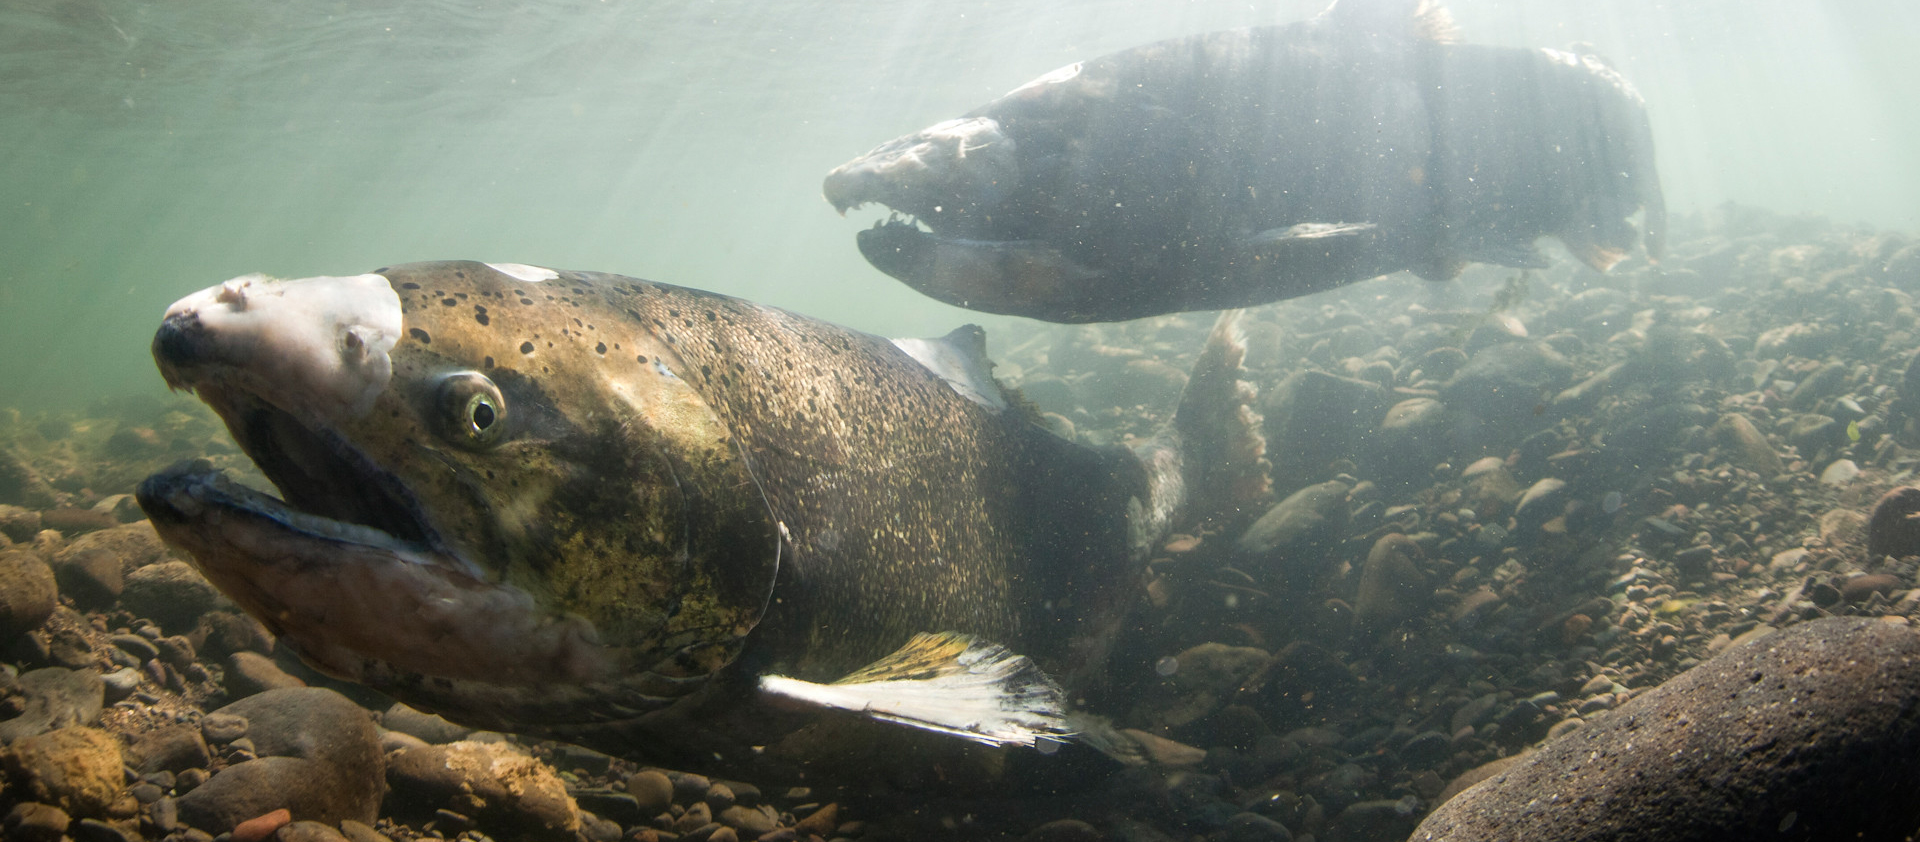 Underwater view of two Chinook salmon swimming along a rocky stream bed.